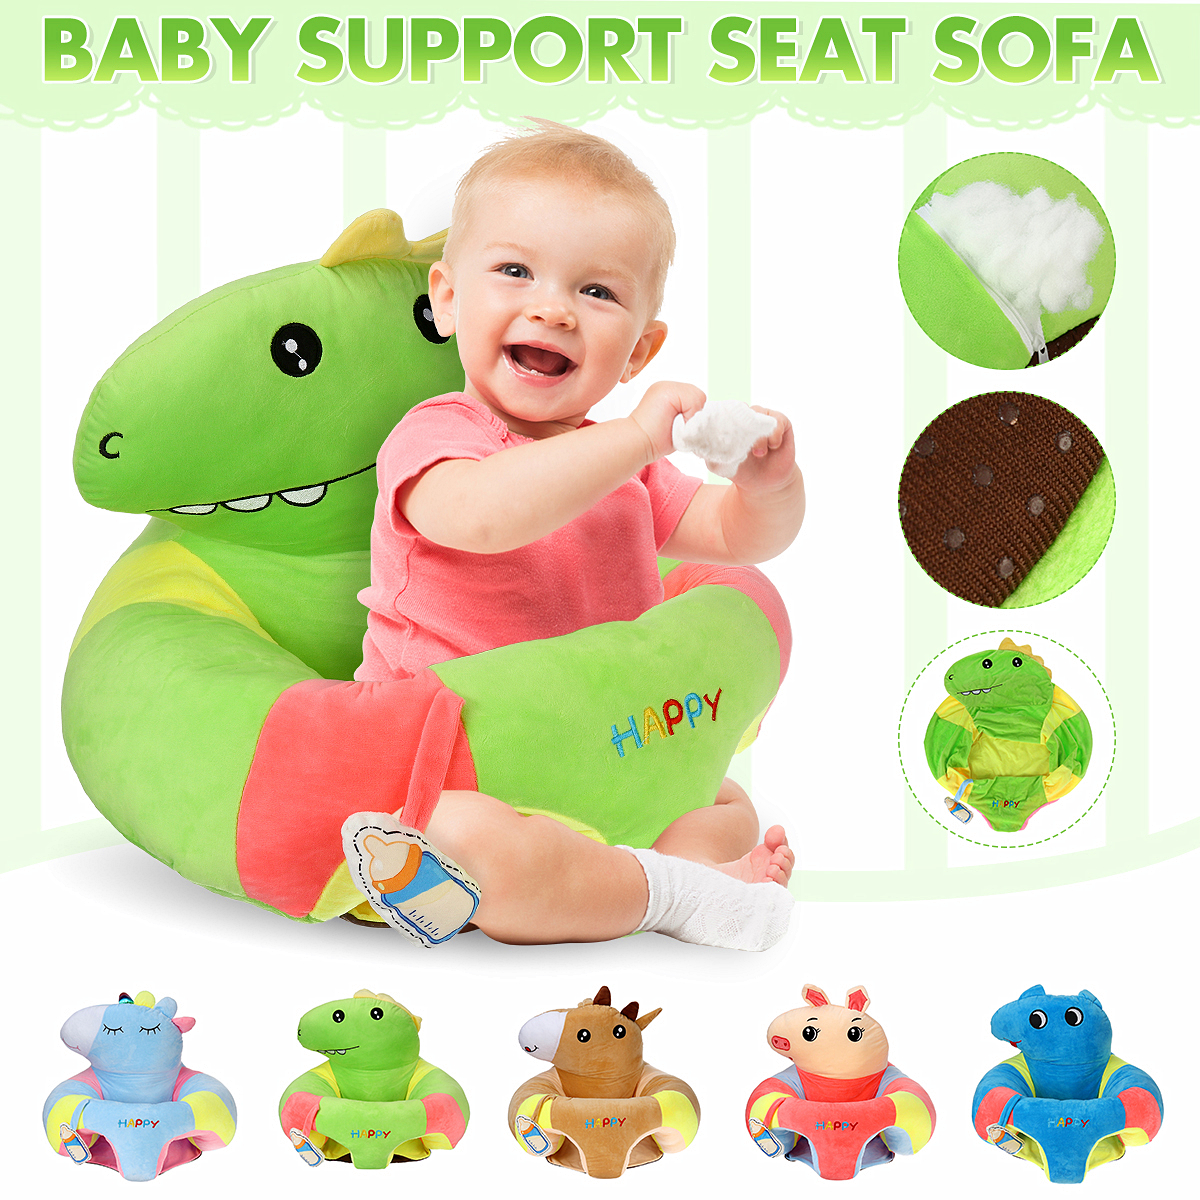 Multi-Style-Kids-Baby-Support-Seats-Sit-Up-Soft-Chair-Sofa-Cartoon-Animal-Kids-Learning-To-Sit-Plush-1817560-1